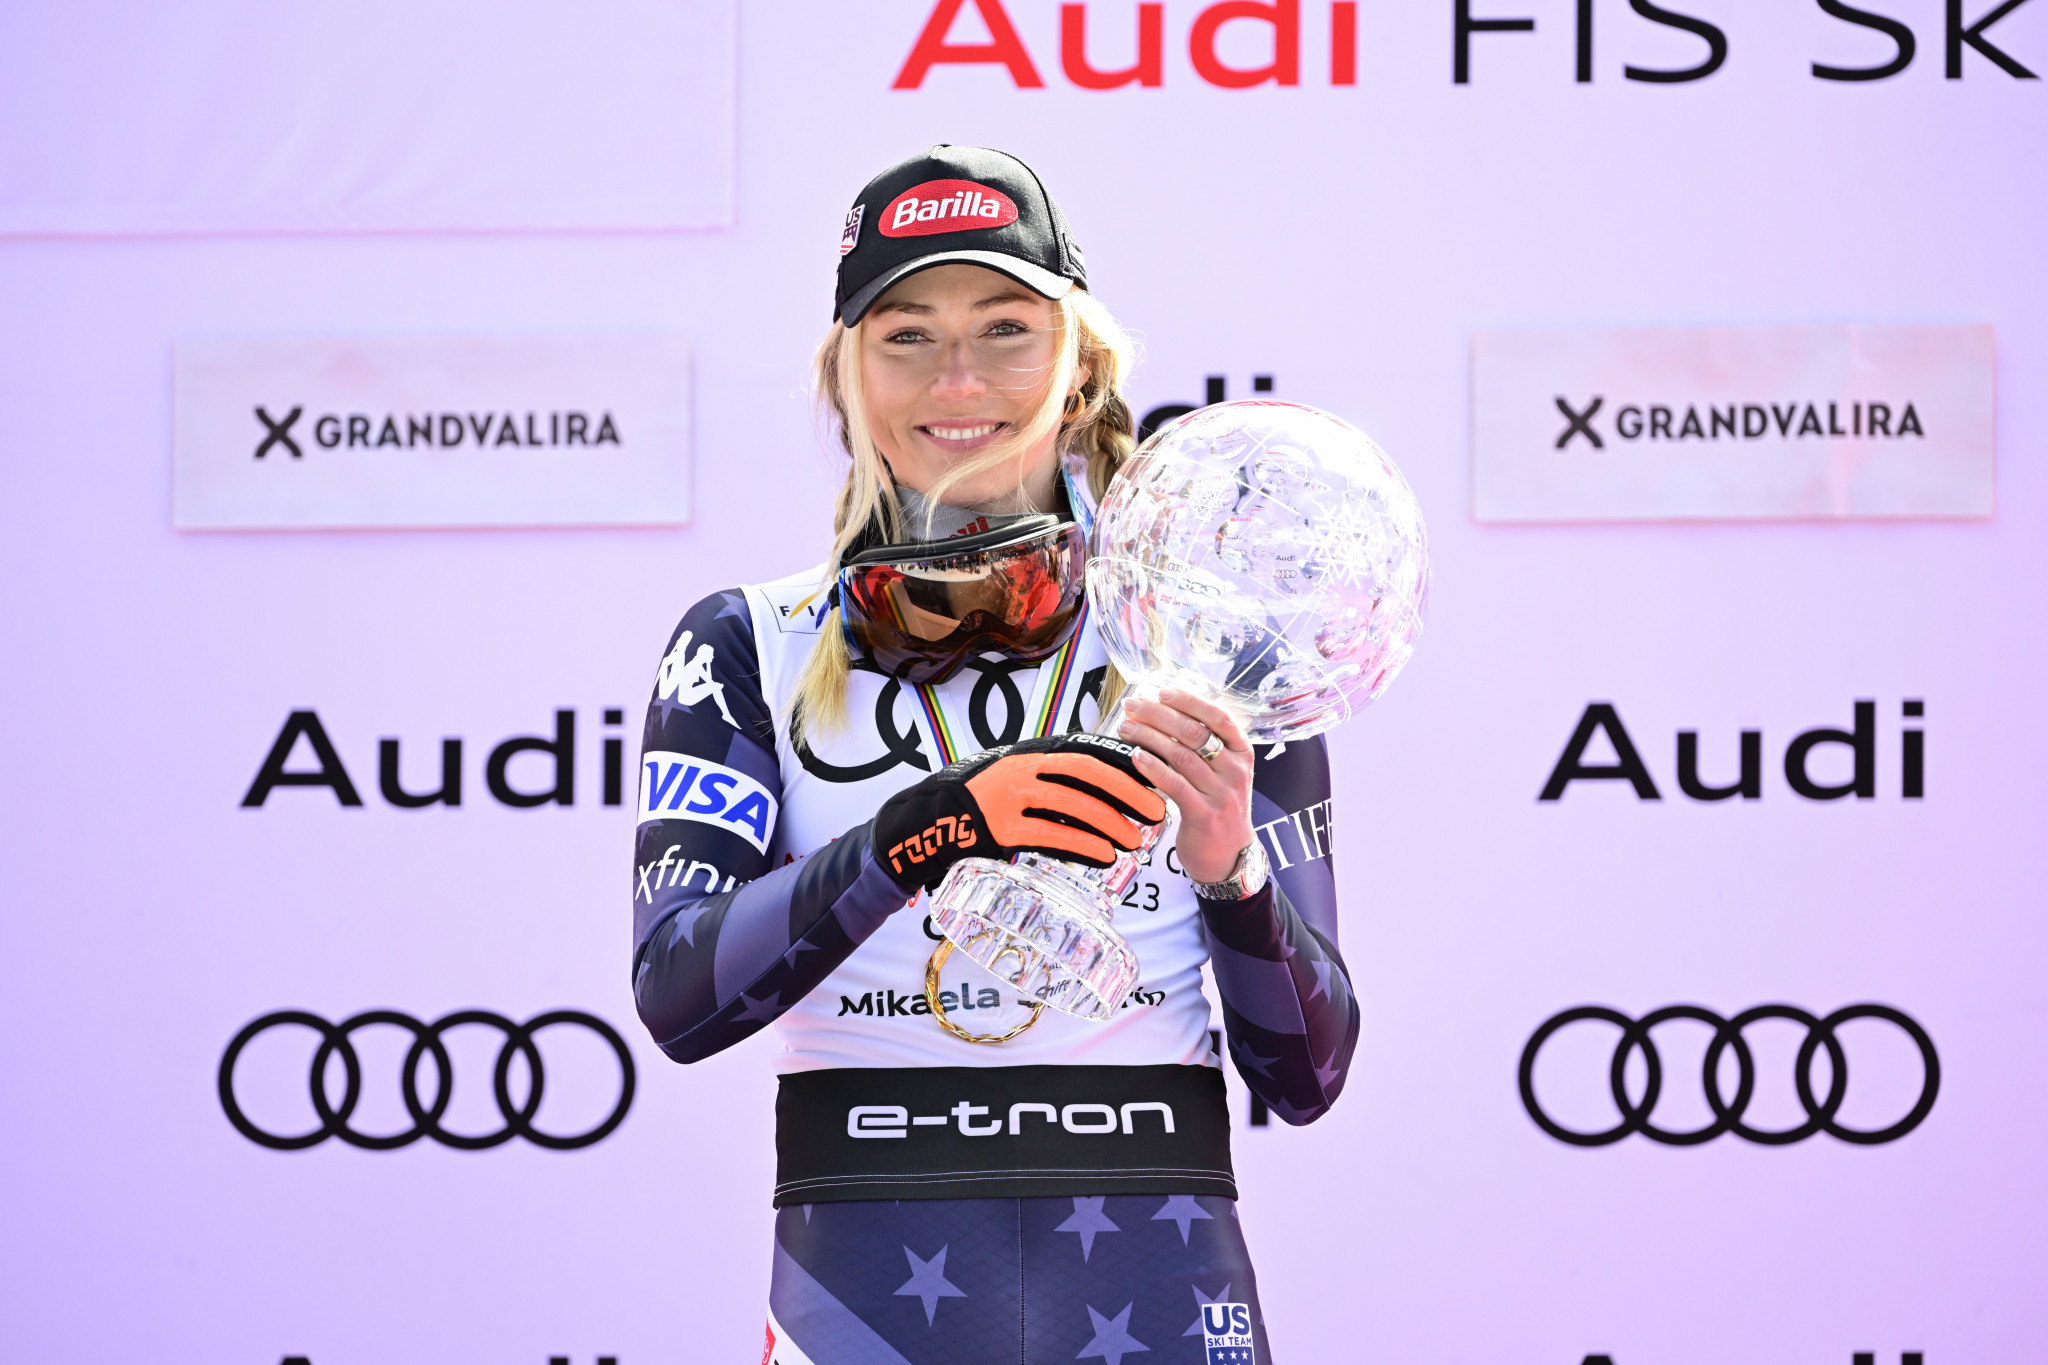 Mikaela Shiffrin secured a second giant slalom Crystal Globe of her career ©Getty Images